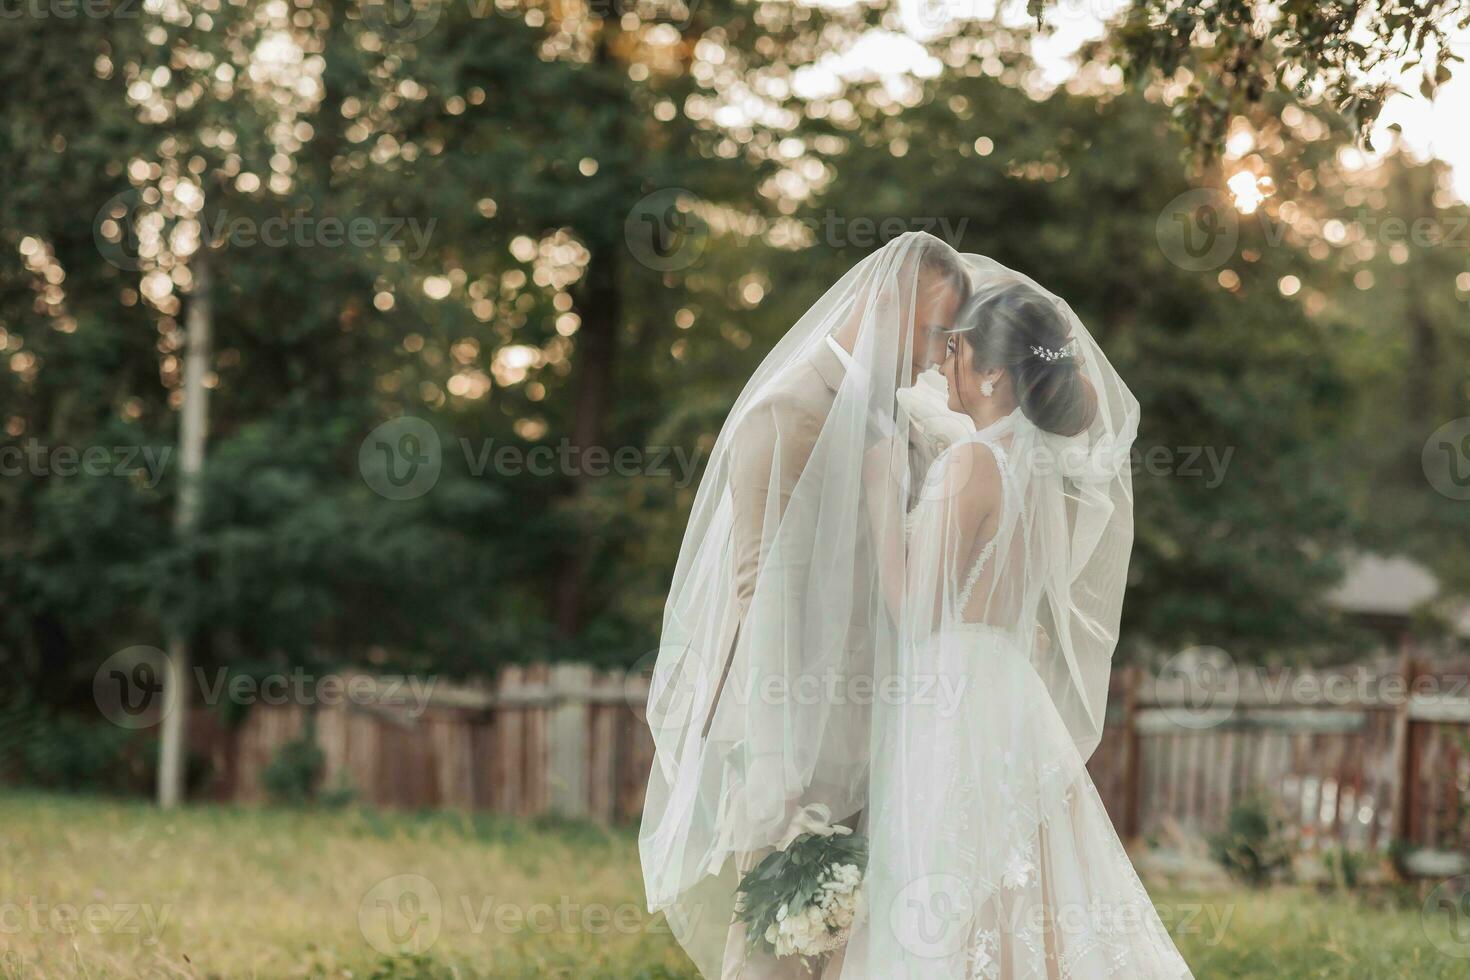 Wedding portrait of the bride and groom. Happy bride and groom gently hug each other under the veil, pose and kiss. Stylish groom. Beautiful young bride photo